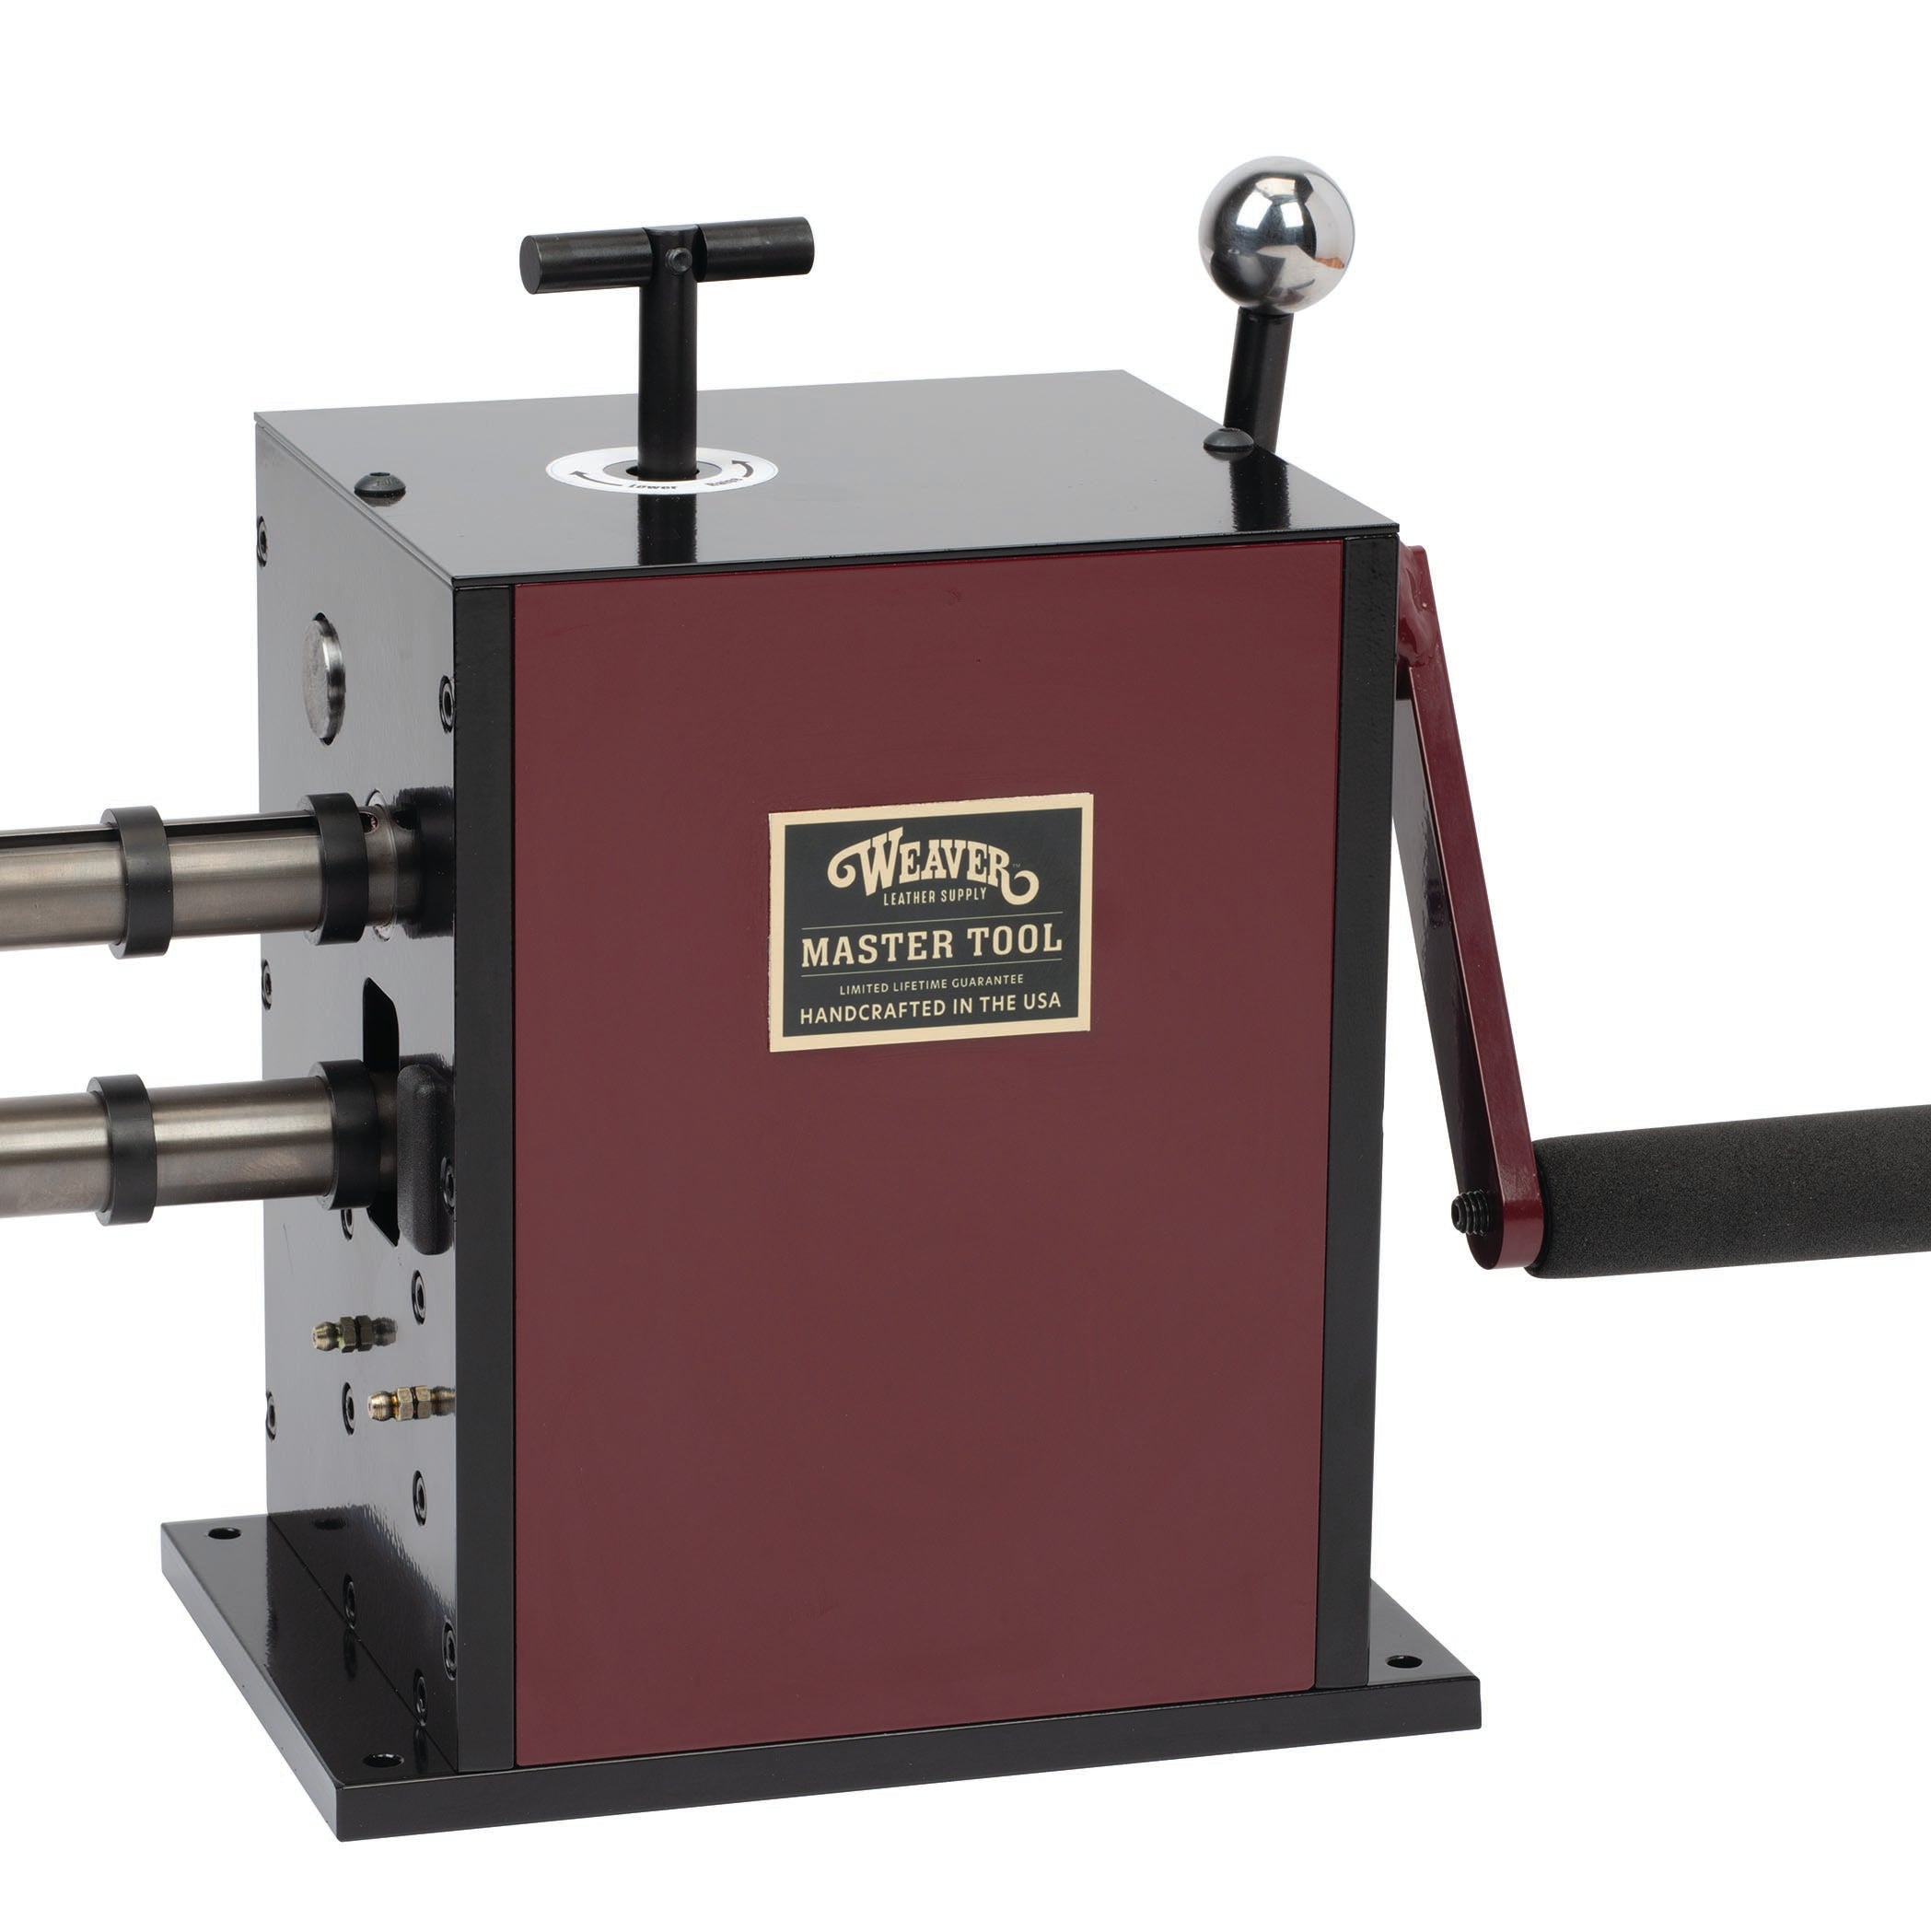 Professional Handy Leather Embossing Machine